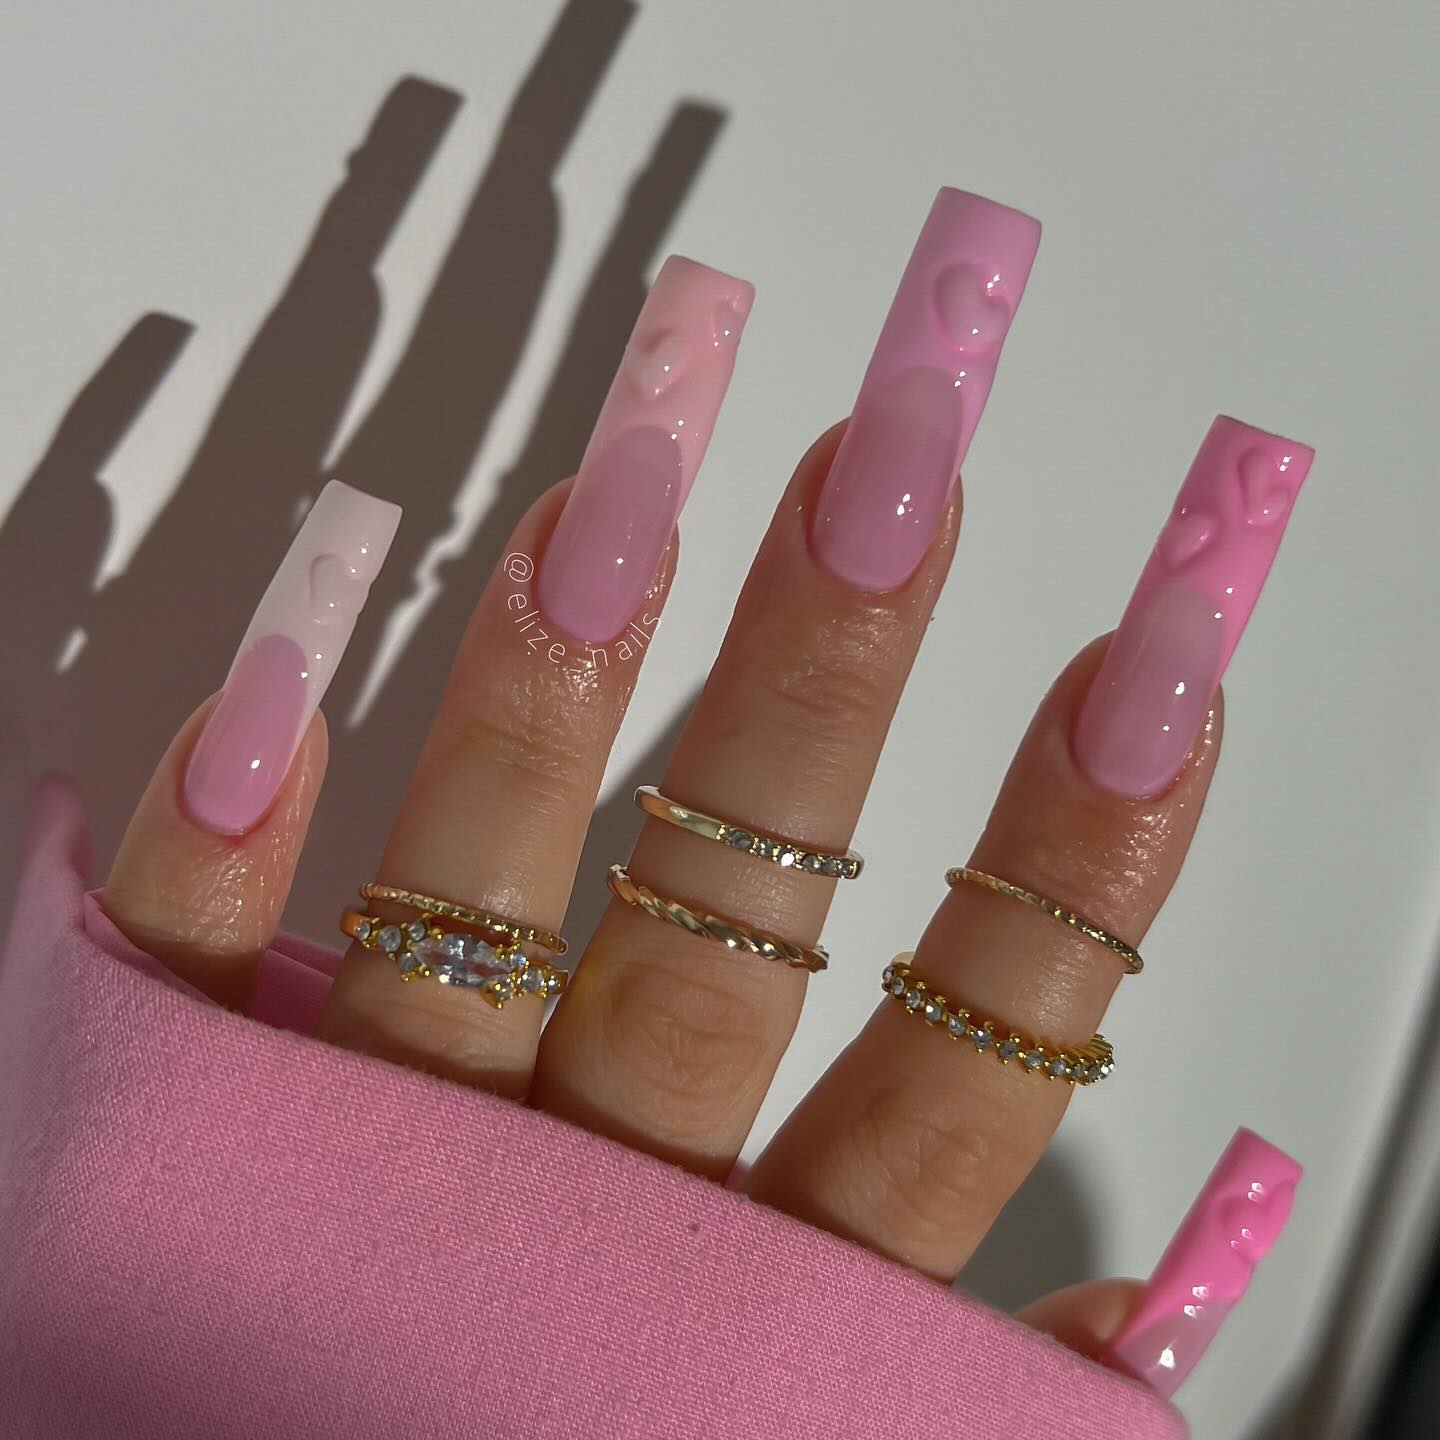 Glossy Pink Ombre Stiletto Nails with Drip Design